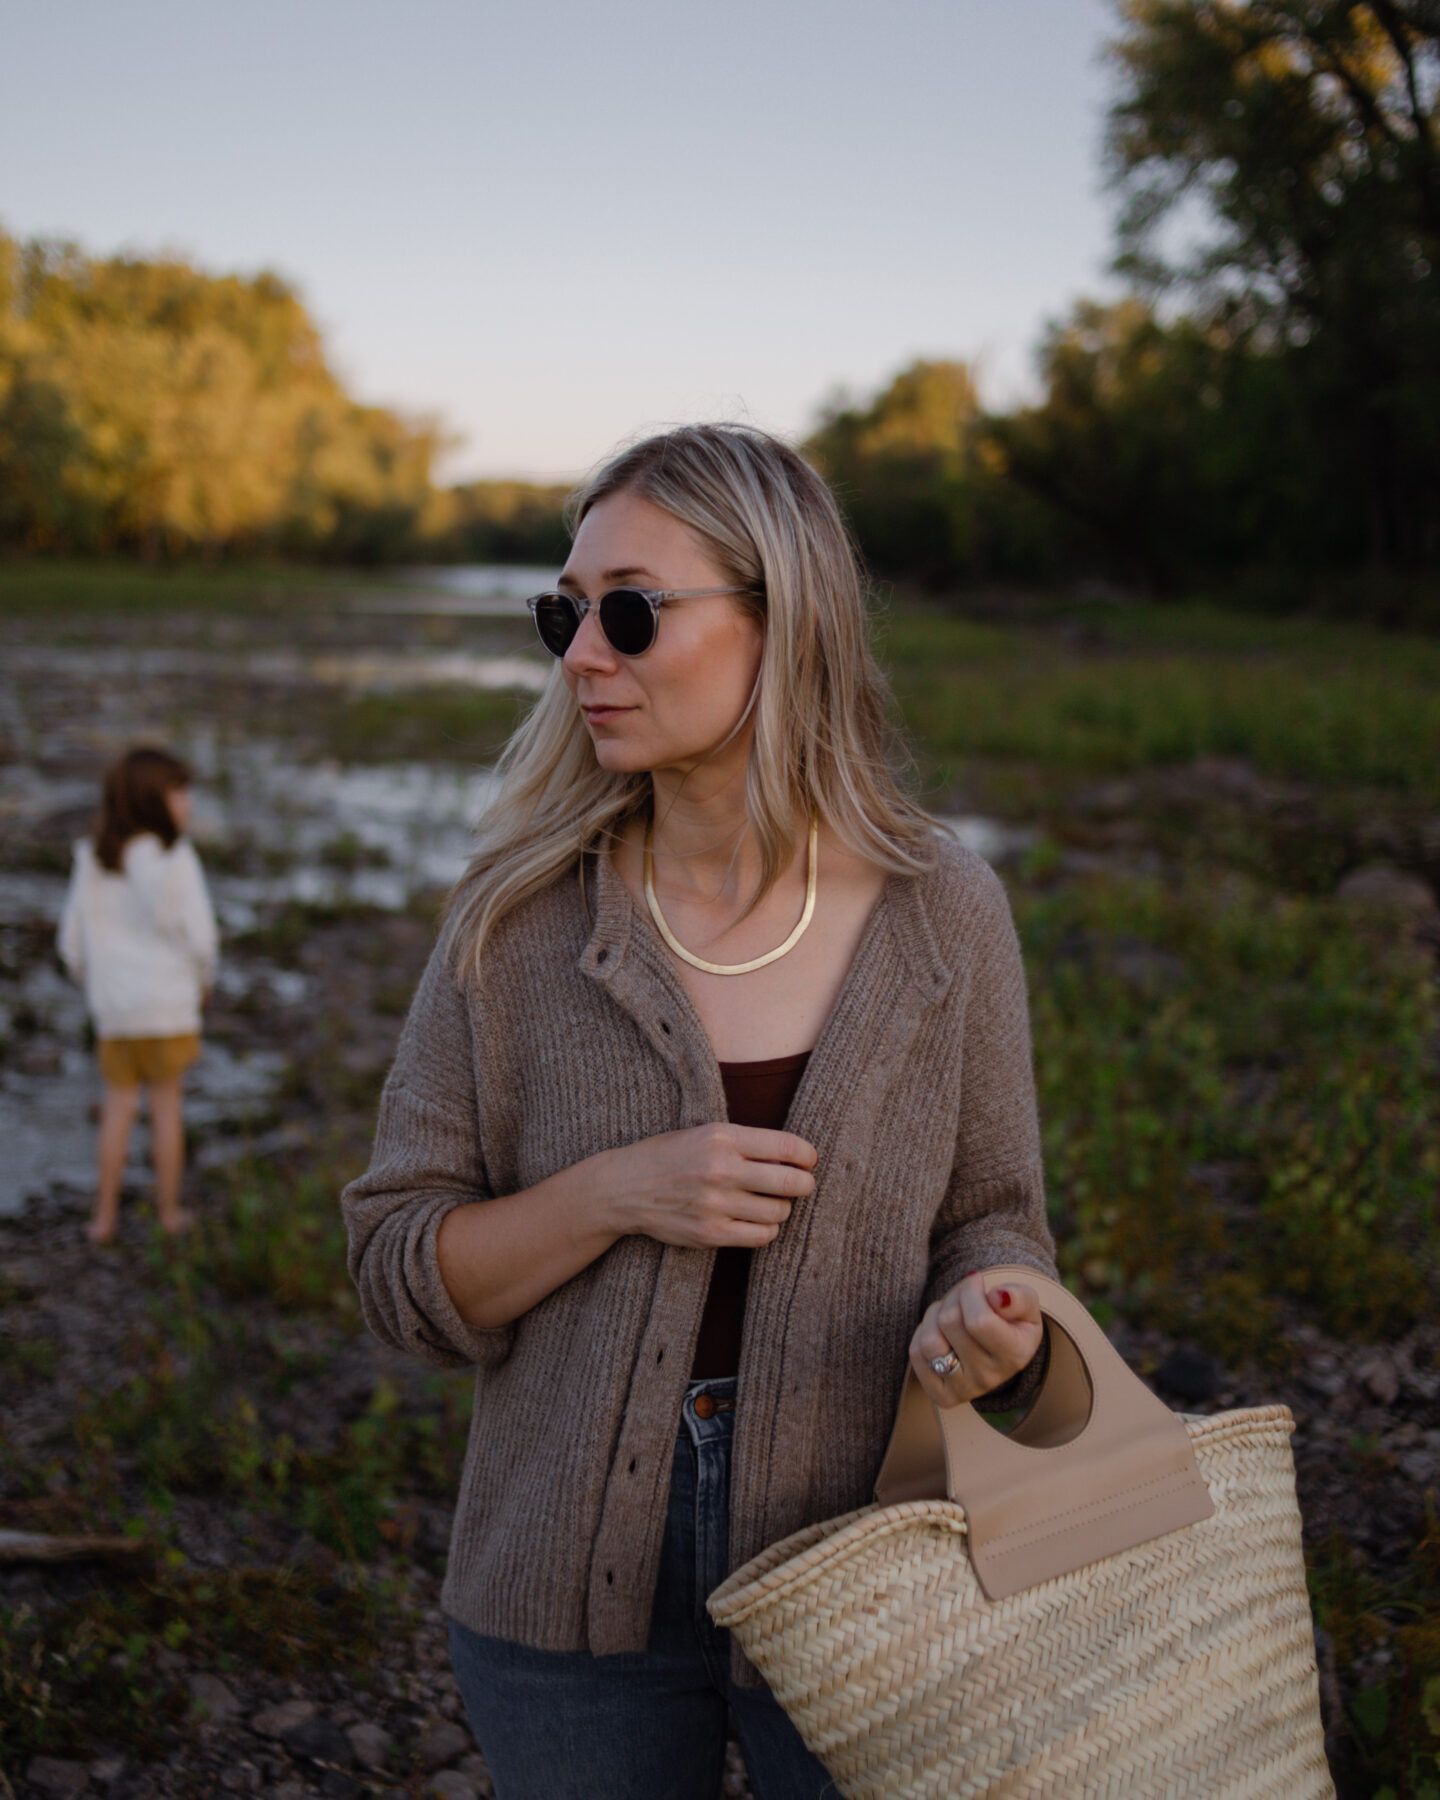 girl standing in front of a river wearing a cozy Madewell sweater and carrying a basket bag